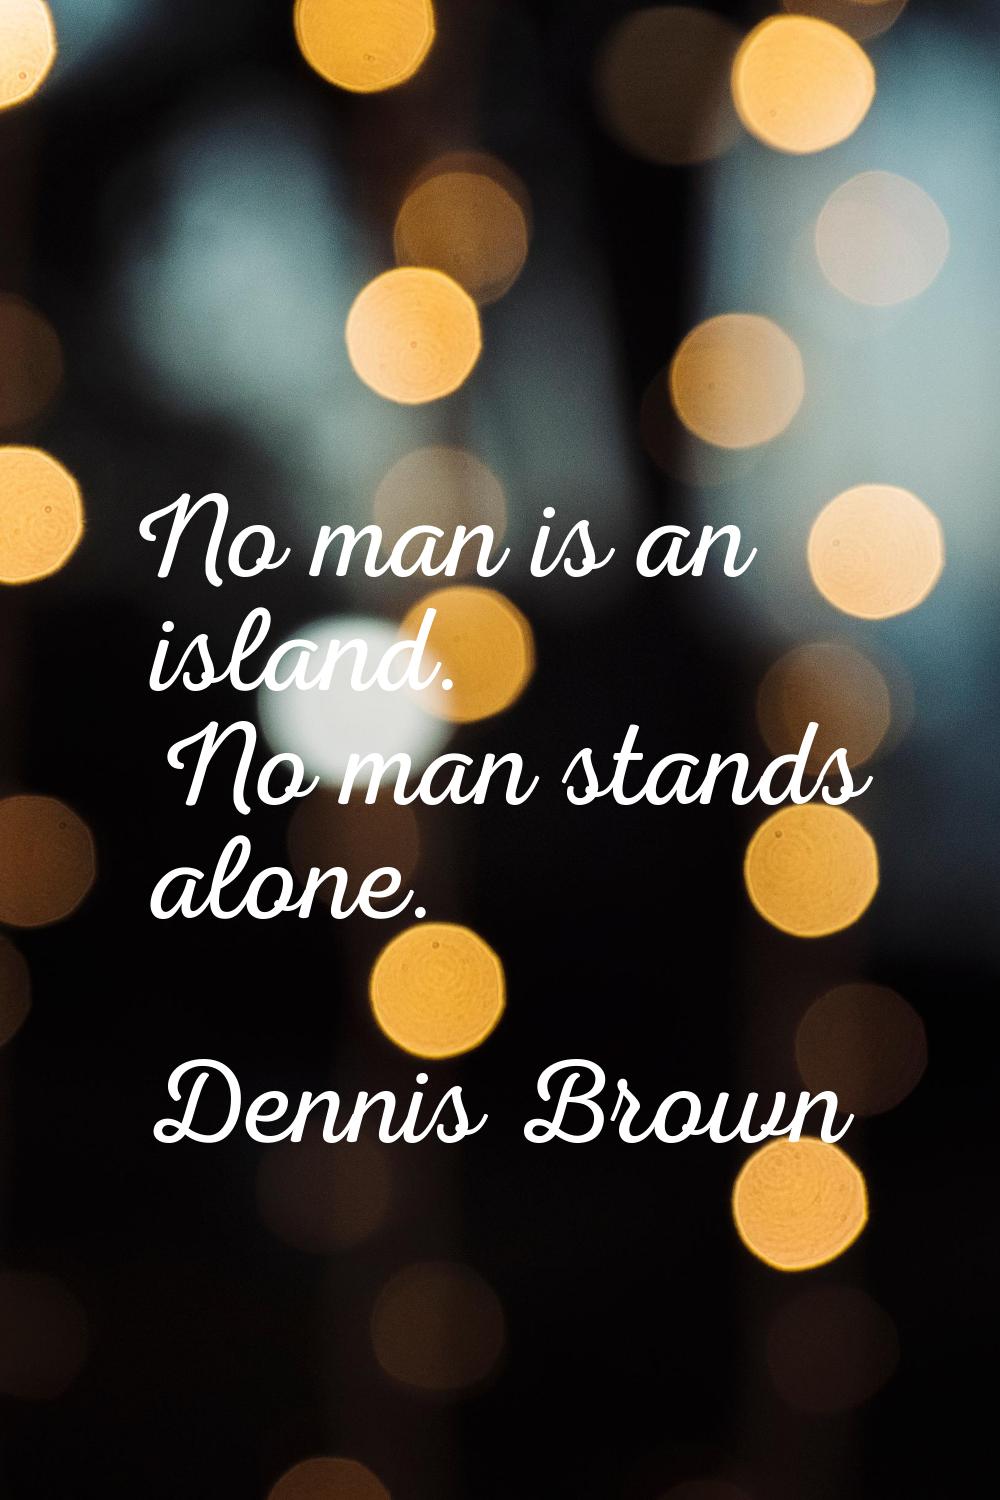 No man is an island. No man stands alone.